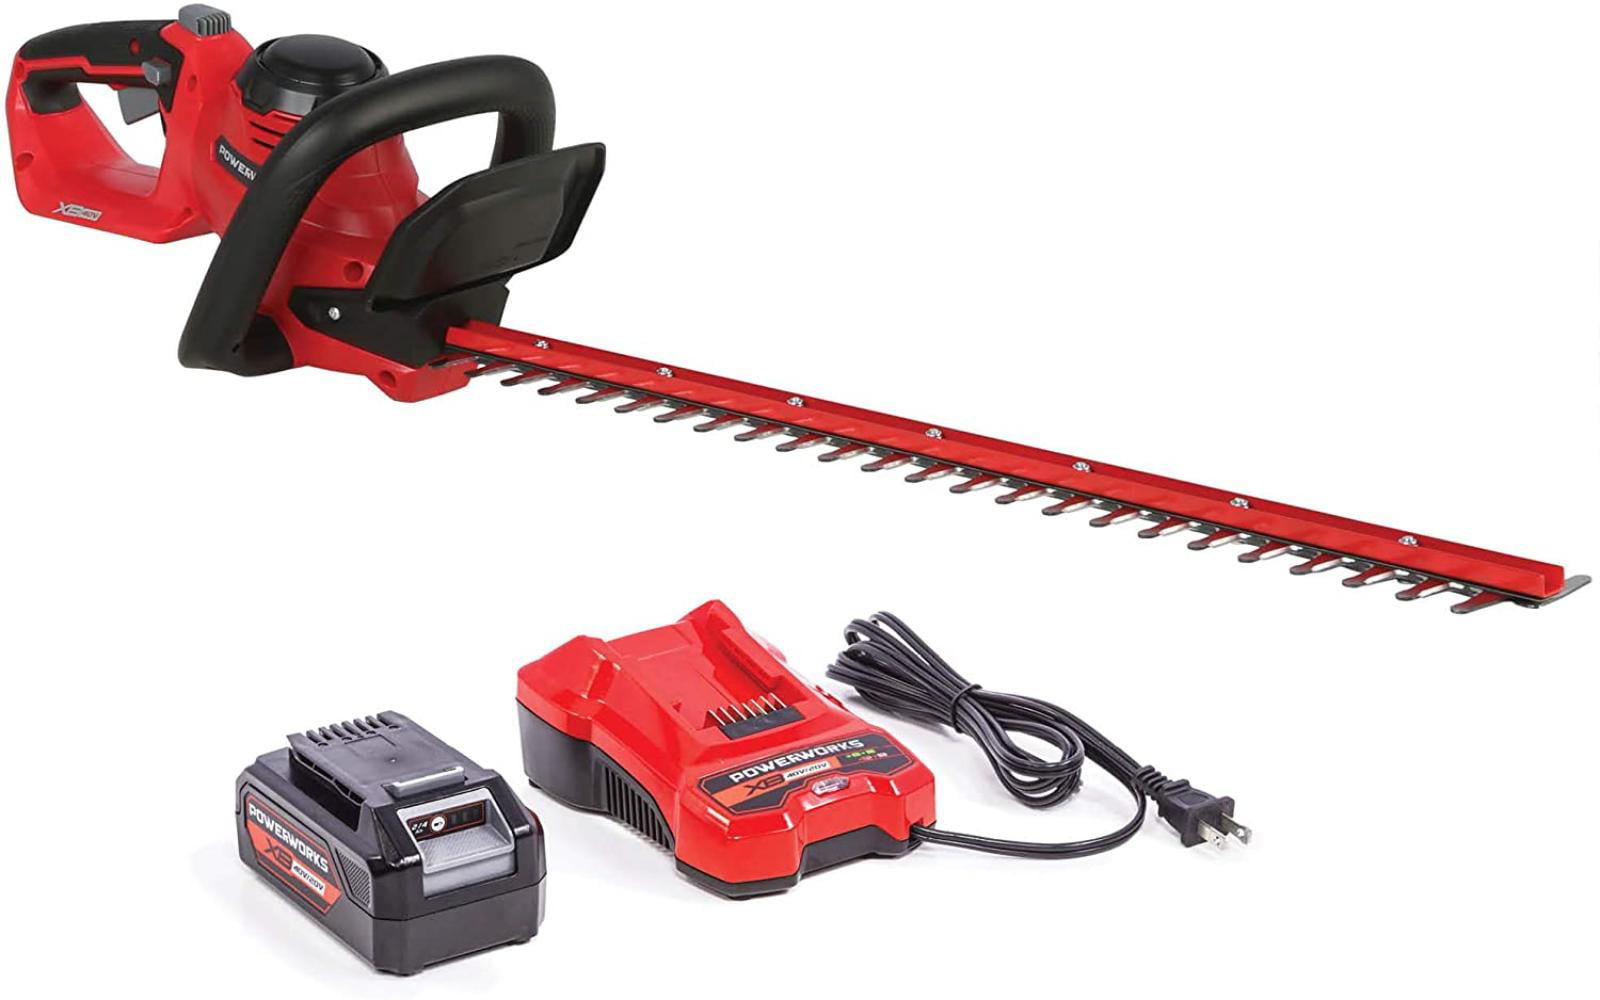 2Ah Battery and Charger Included HTP302 POWERWORKS XB 40V 24-Inch Cordless Hedge Trimmer 